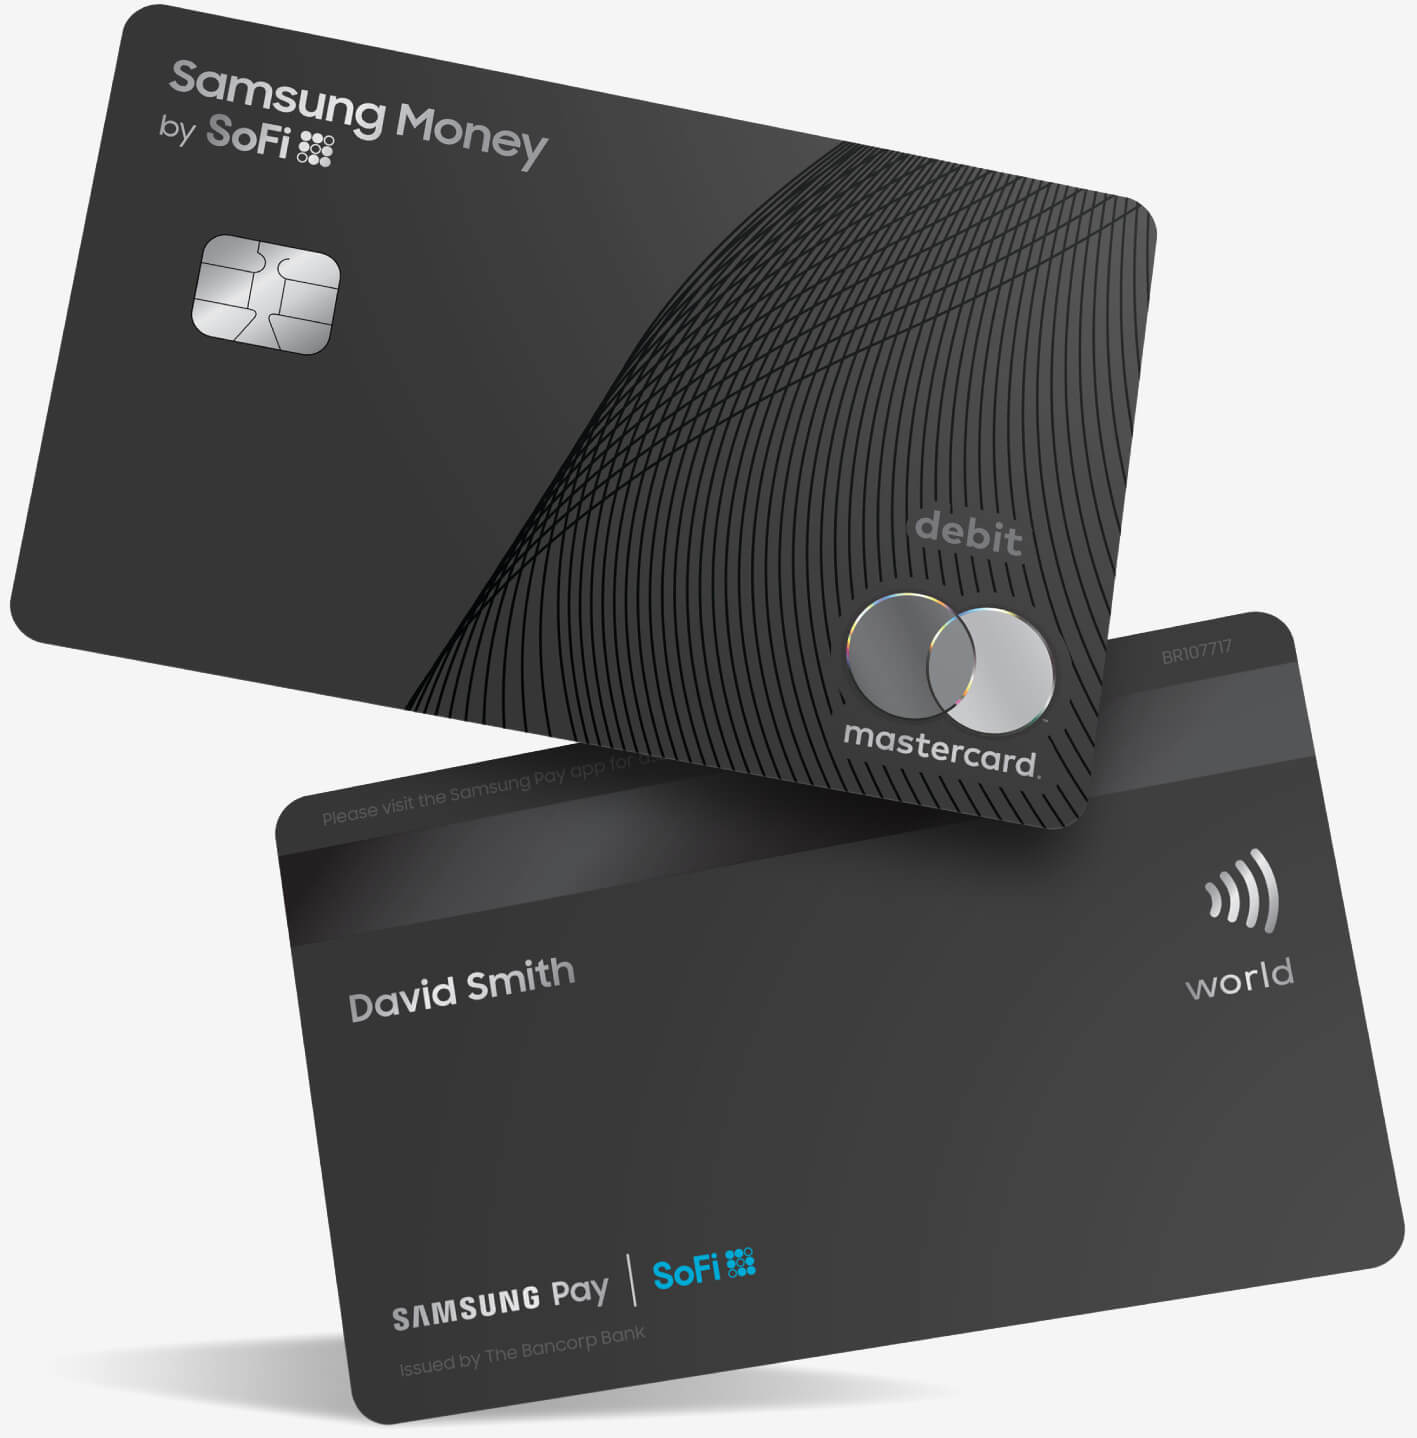 Samsung's new debit card is tightly integrated with